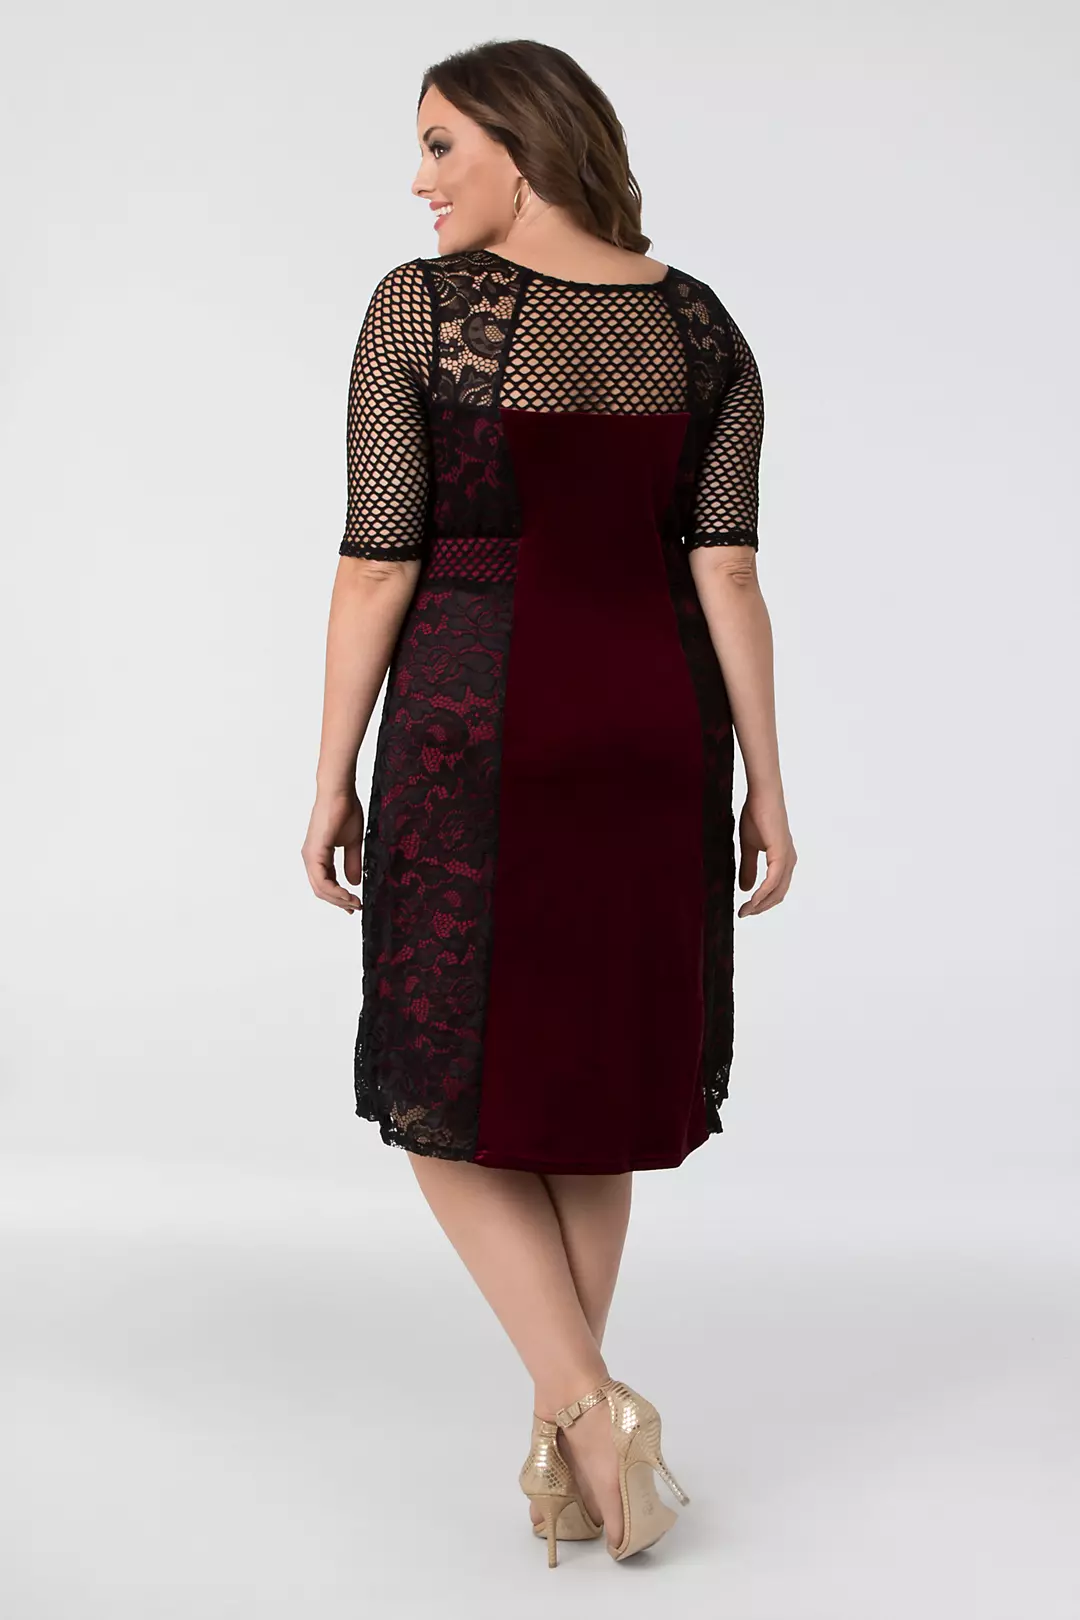 Mixed Lace and Mesh Plus Size Cocktail Dress Image 2